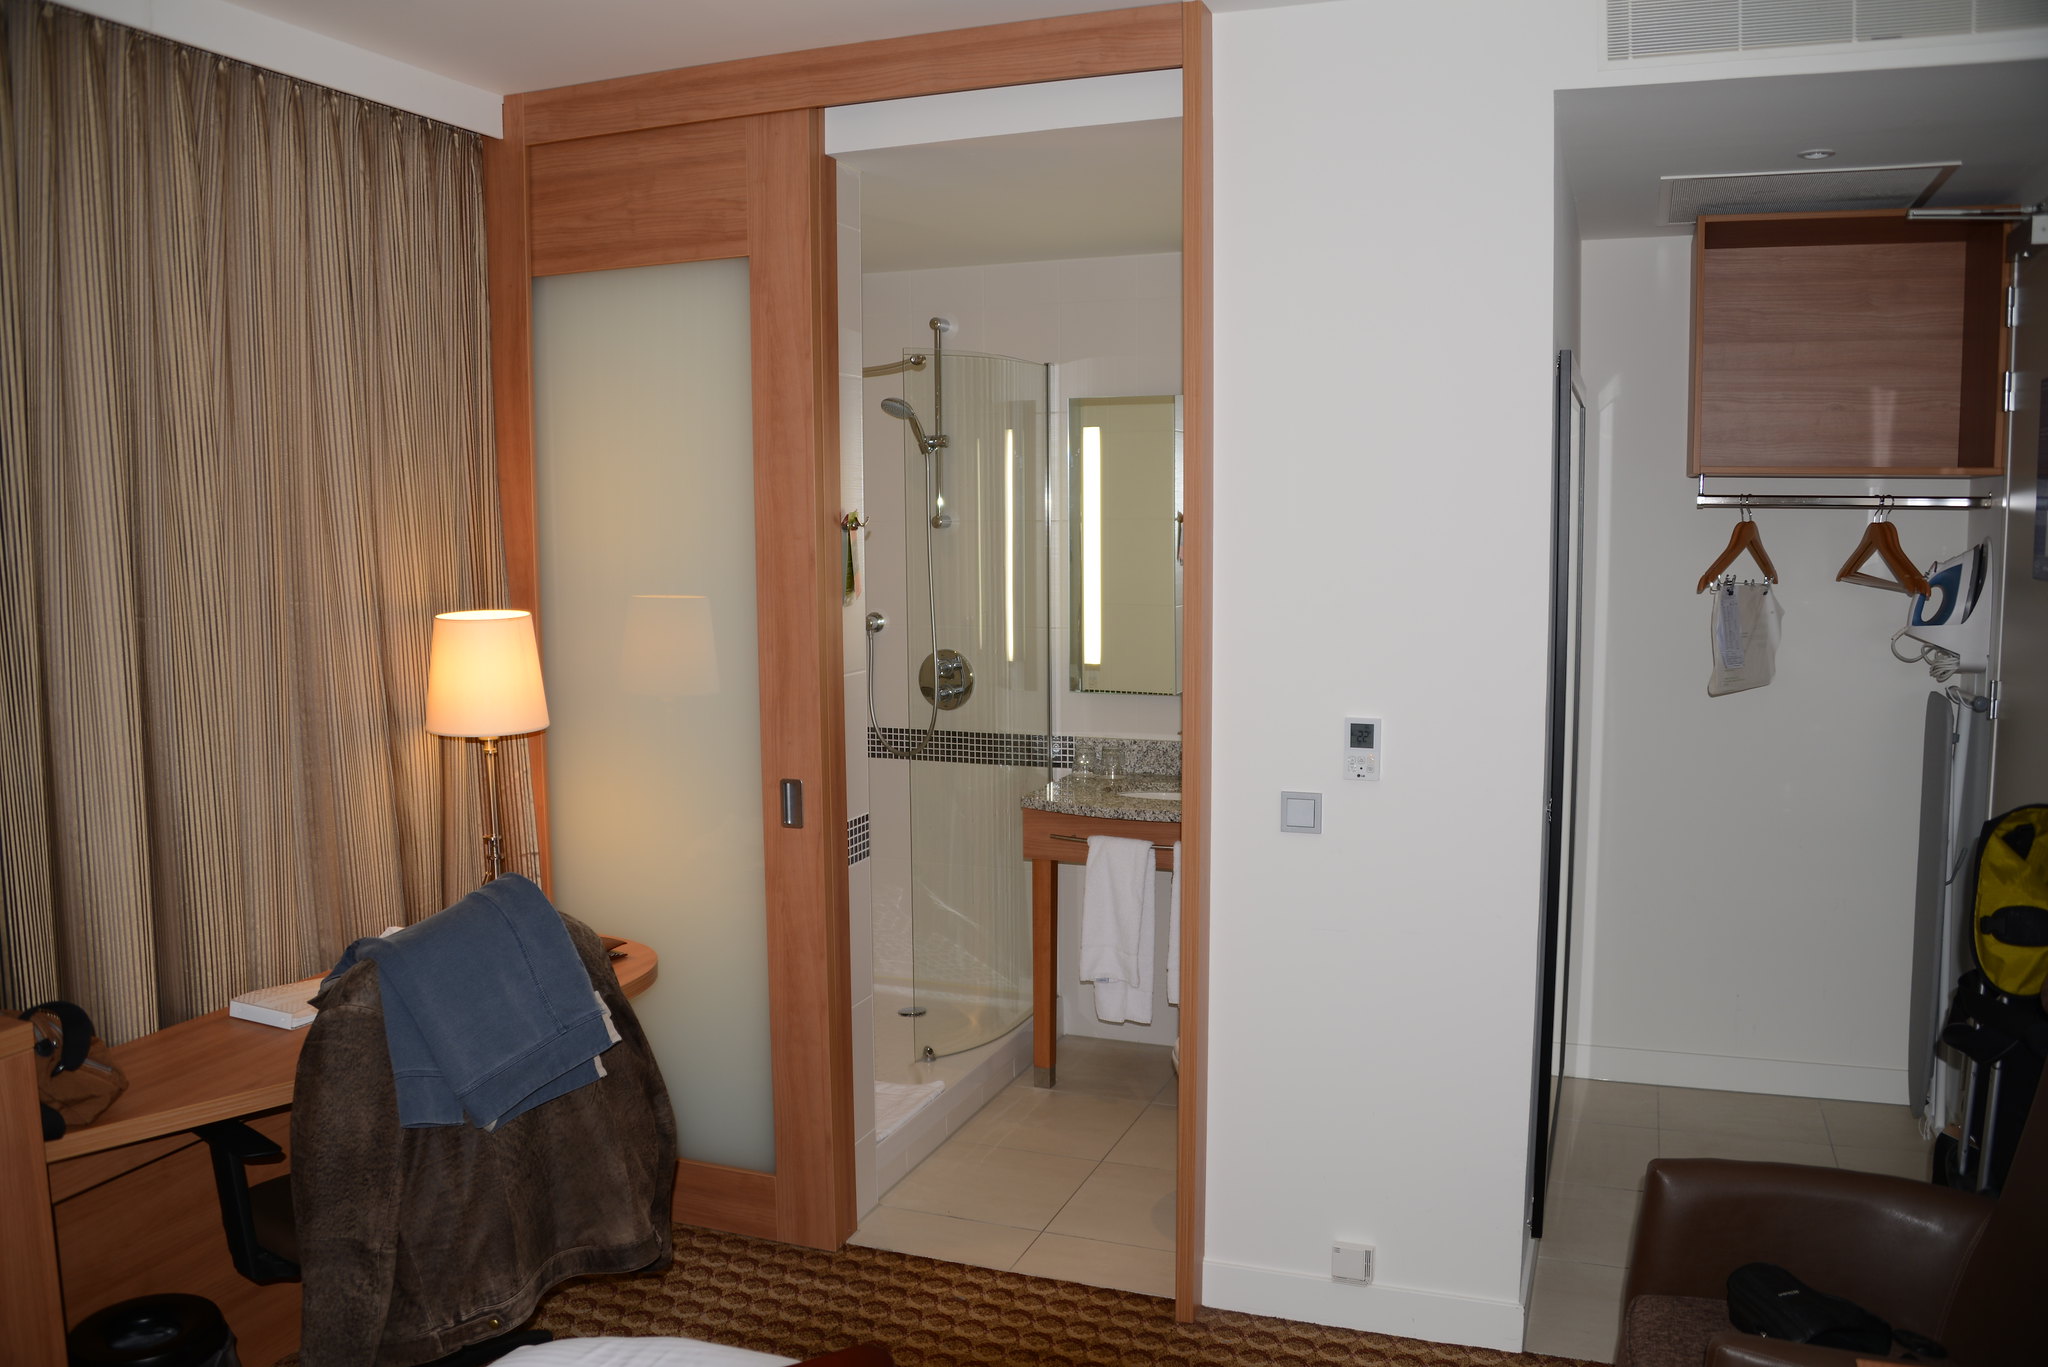 Our room at the Hampton Inn at Amsterdam airport